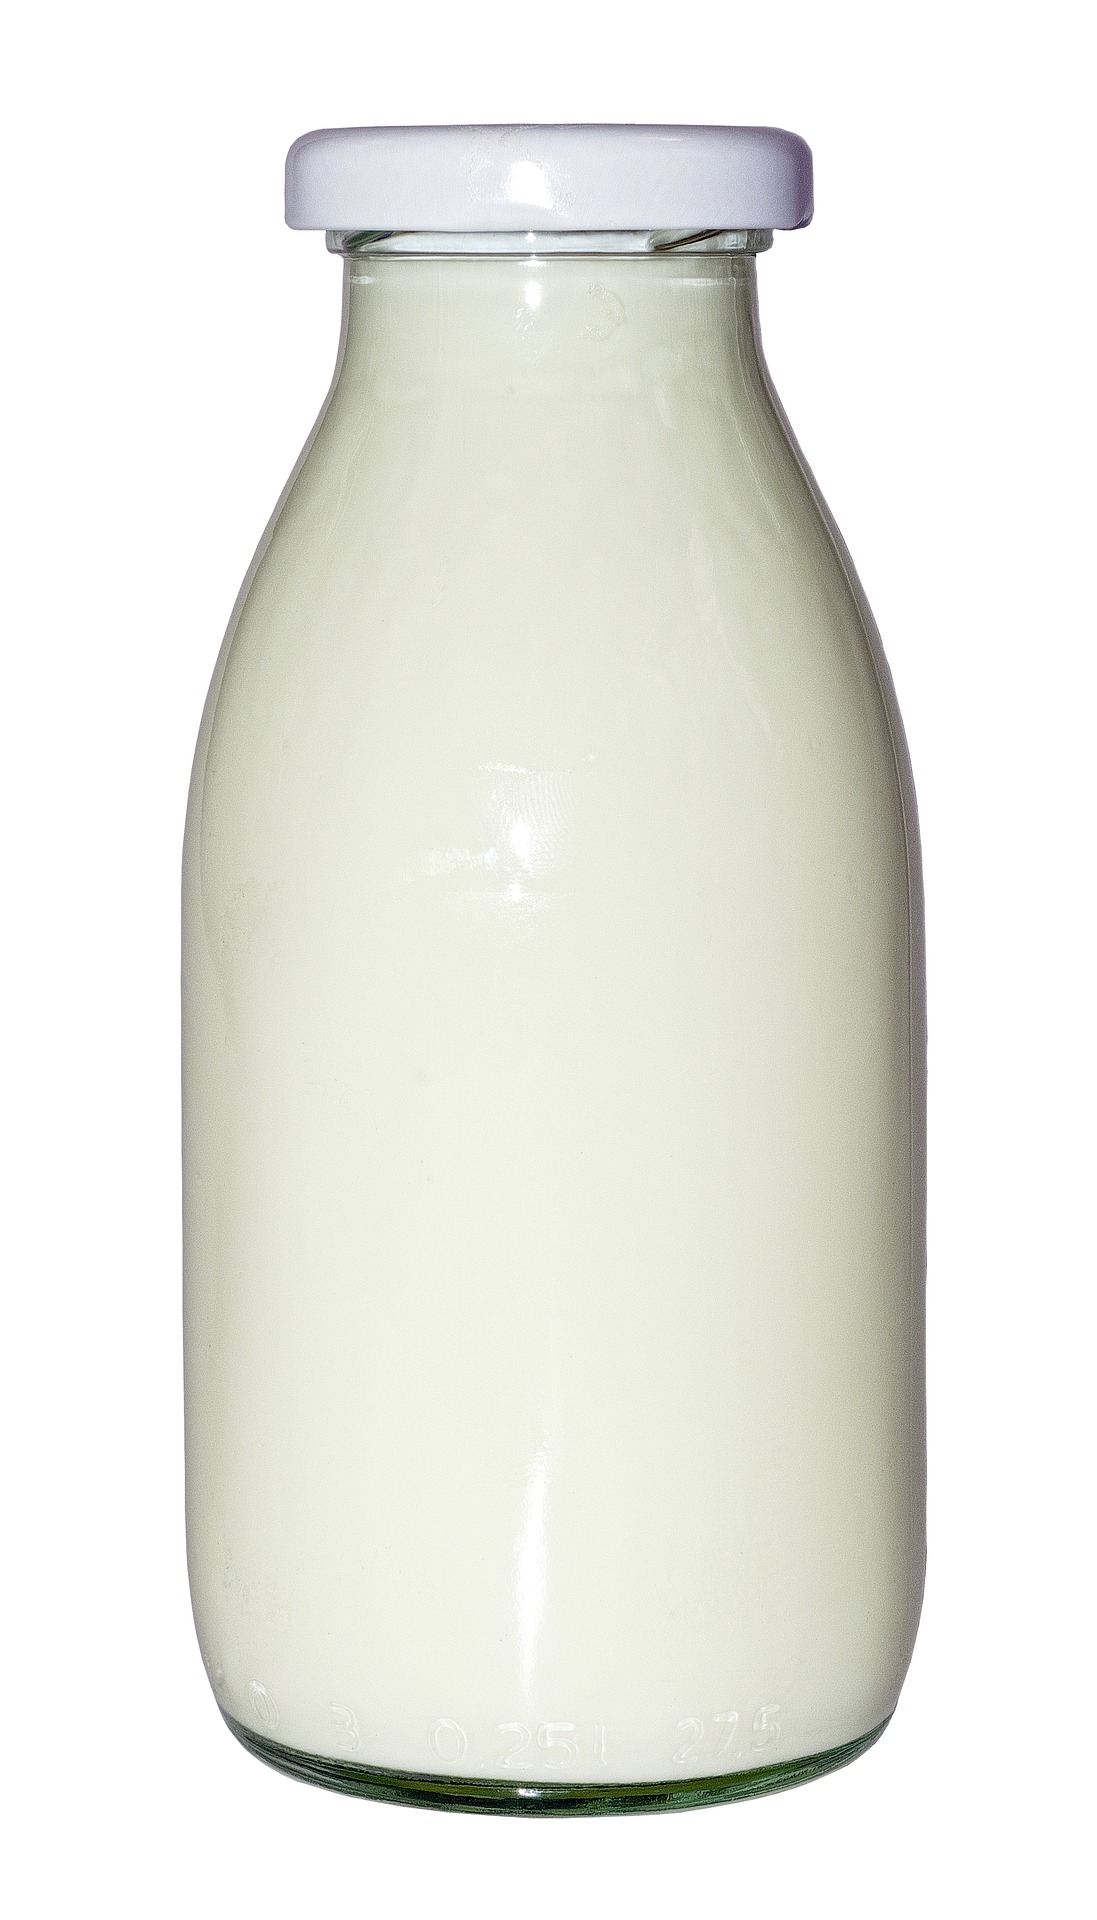 Image of an milk